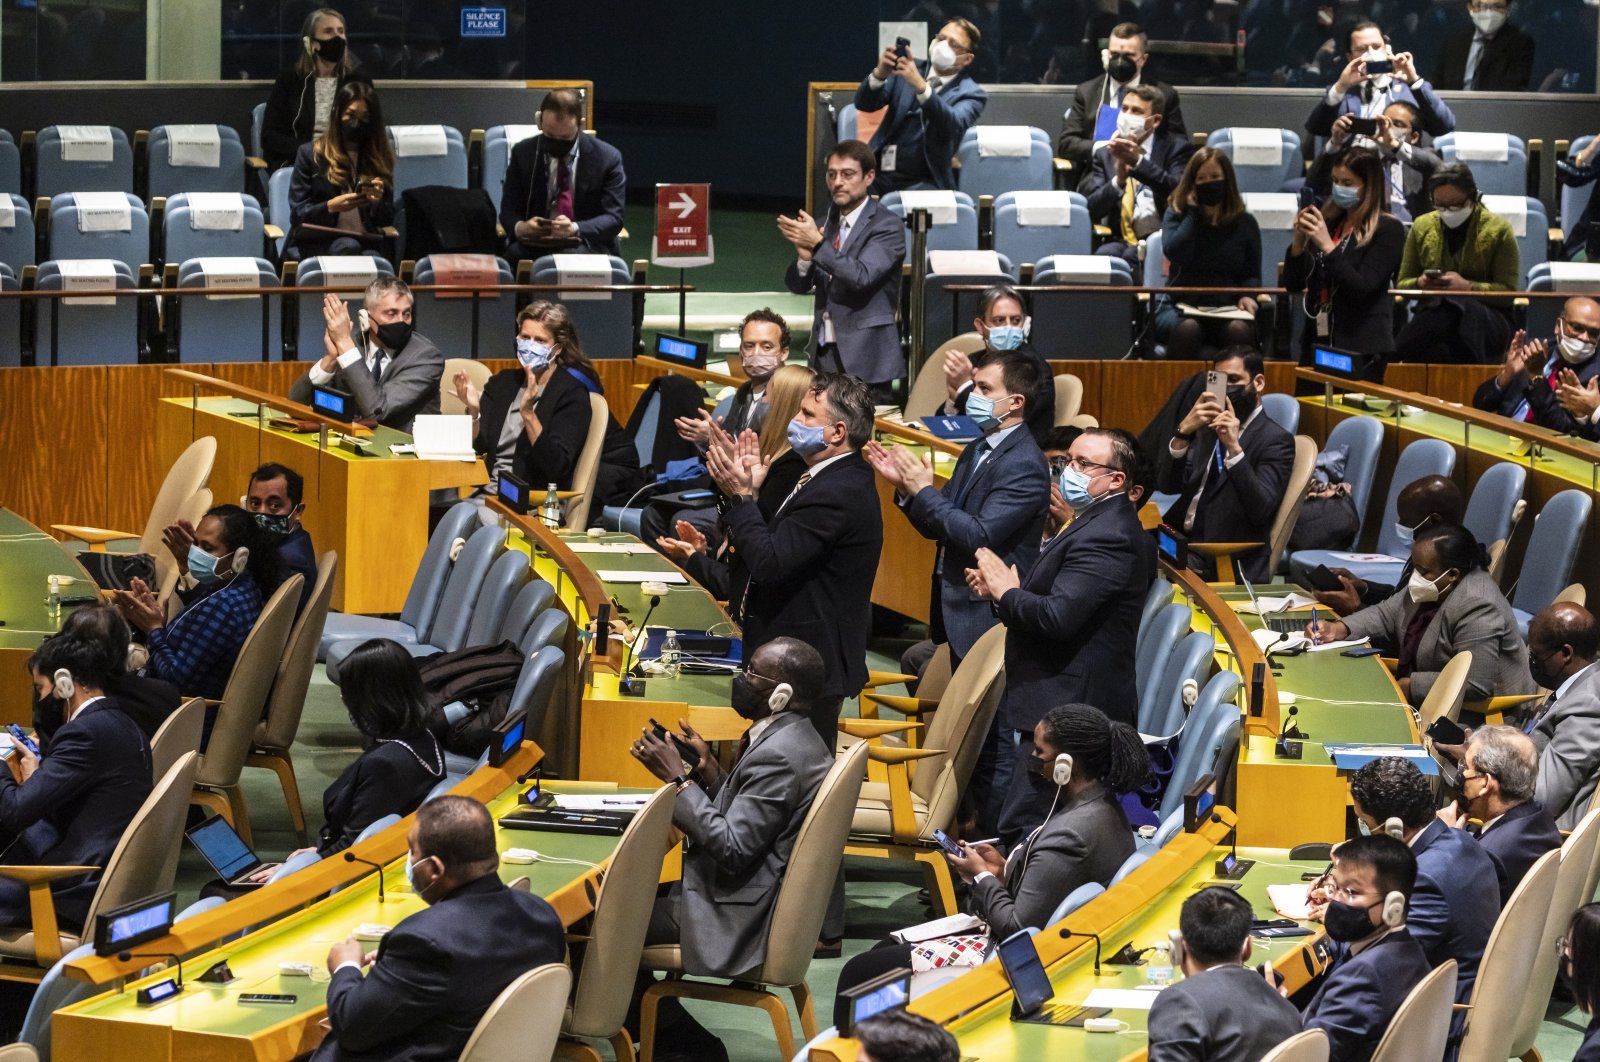 Ukraine’s Ambassador to the United Nations Sergiy Kyslytsya (C) and his delegation applaud after a resolution condemning Russia’s invasion of Ukraine was passed during the 11th emergency special session of the U.N. General Assembly at United Nations headquarters in New York, U.S., March 2, 2022. (EPA Photo)